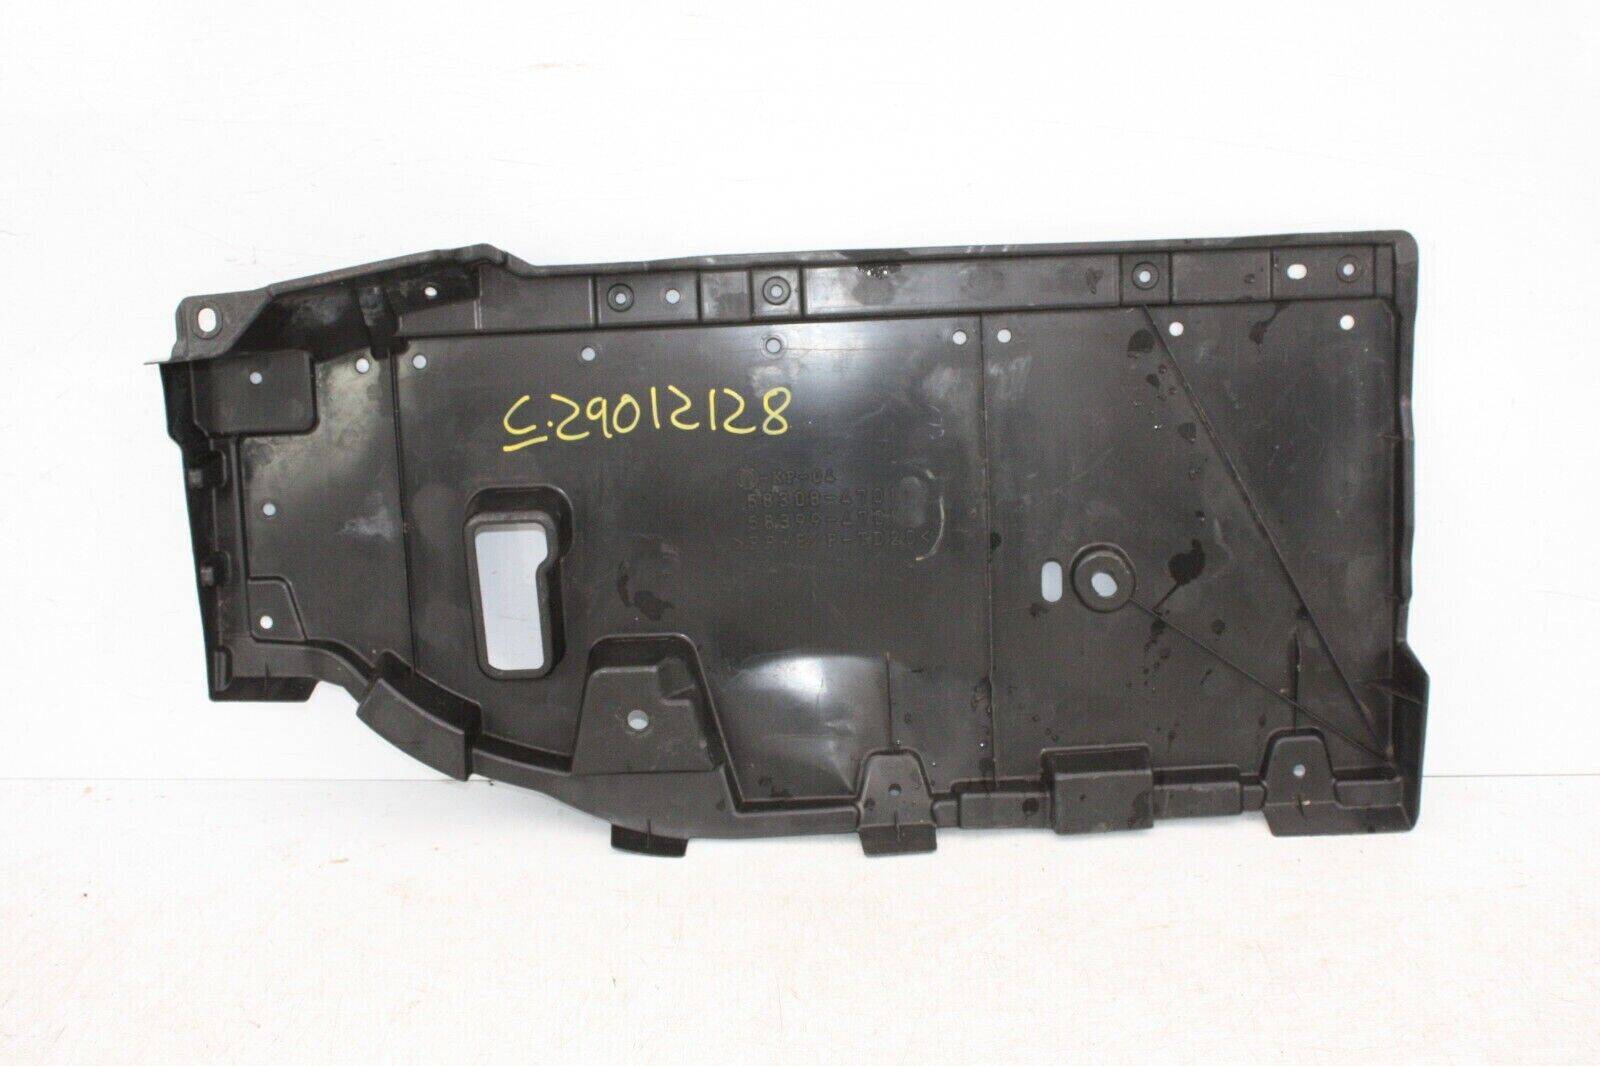 Toyota-prius-Rear-middle-underbody-tray-cover-58308-47011-175407786485-6